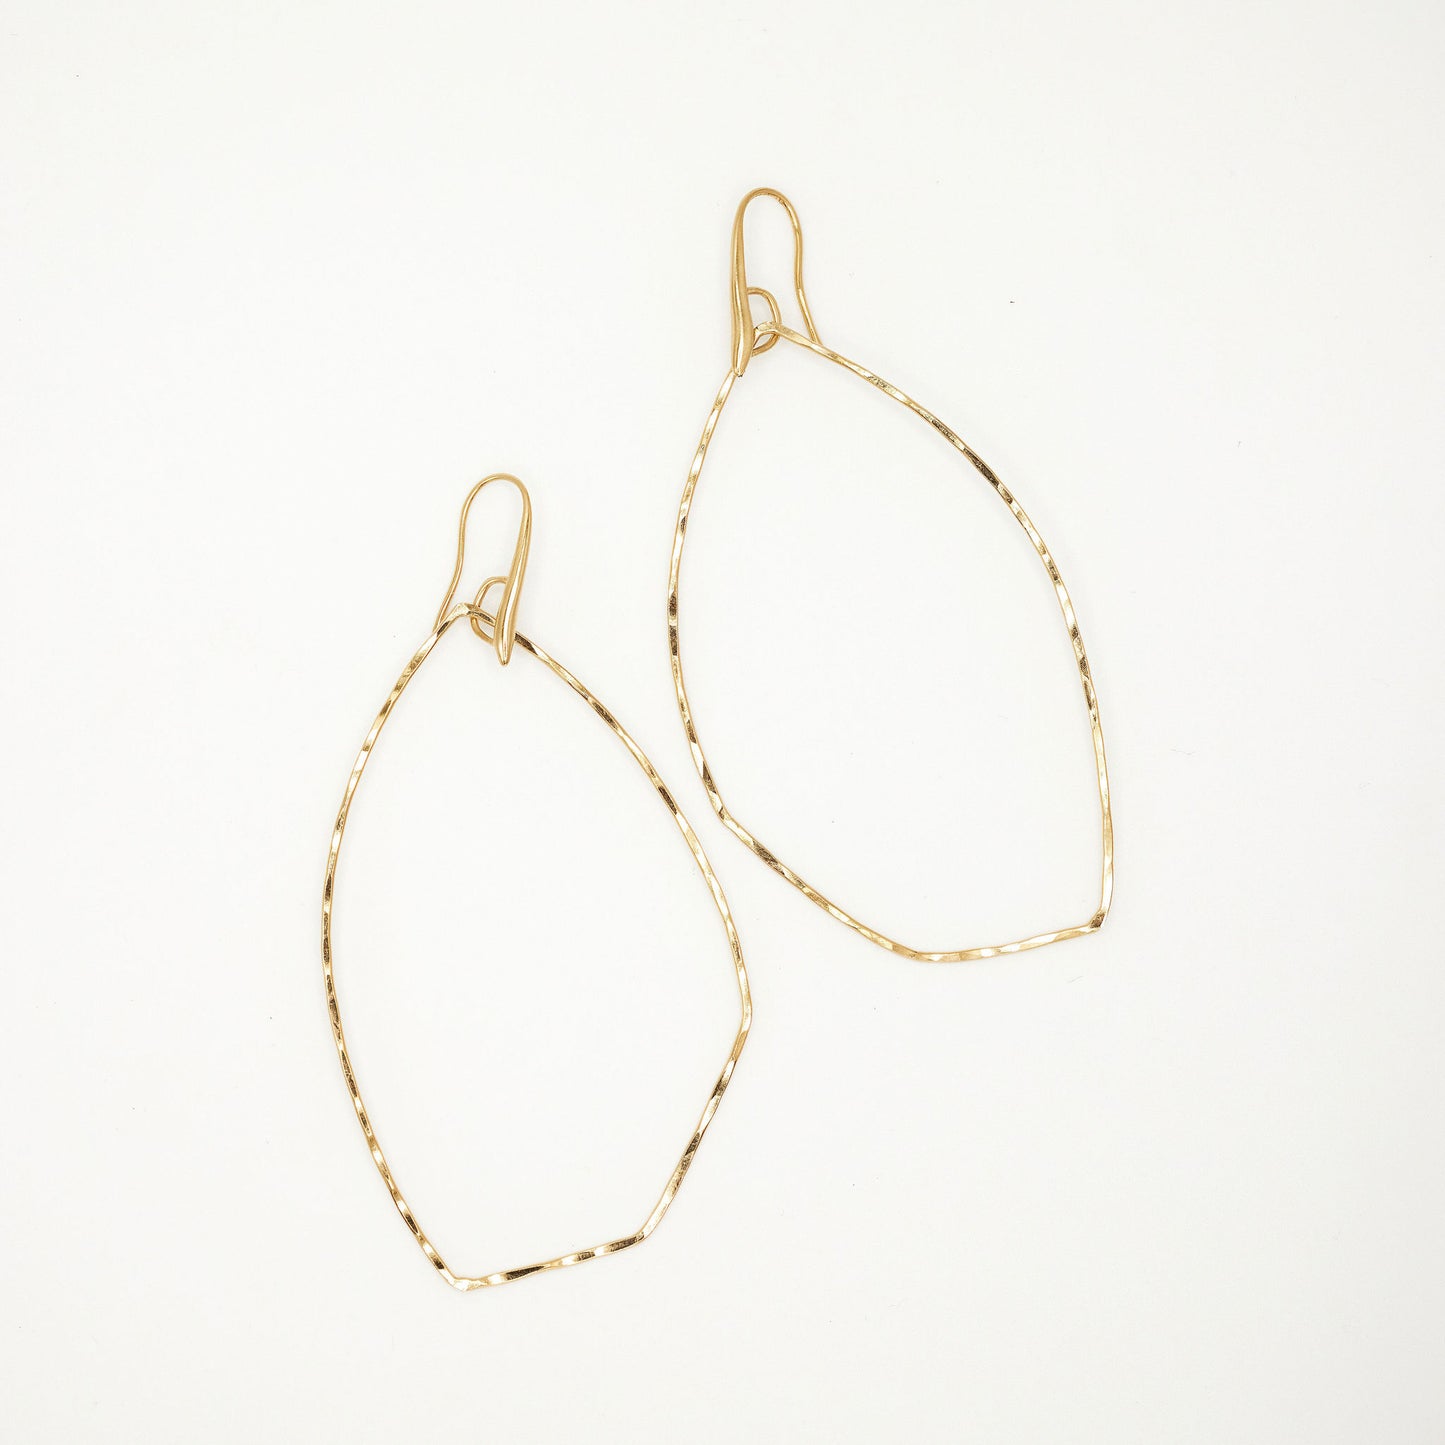 Load image into Gallery viewer, Gold hoop earrings on white background
